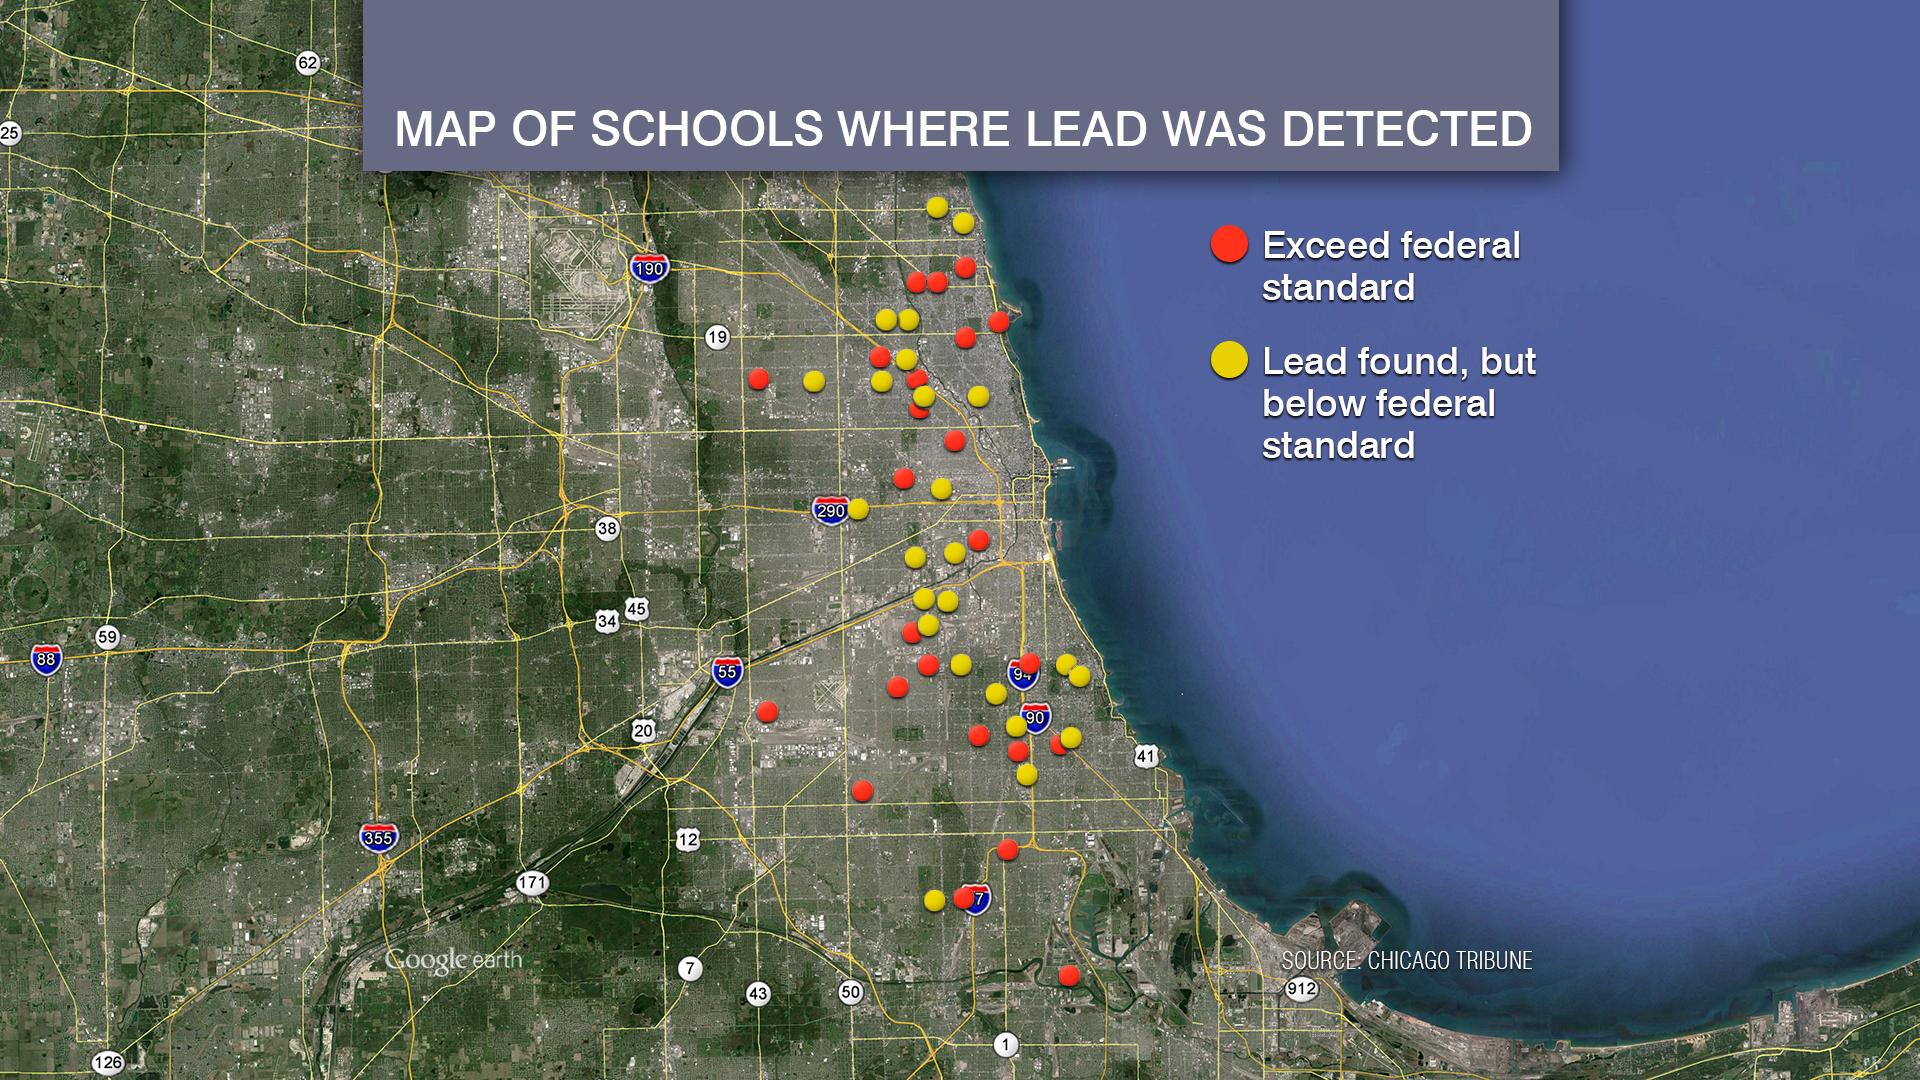 Chicago Public Schools officials released data last year showing high lead levels in water at 113 CPS schools, some of which are shown here.